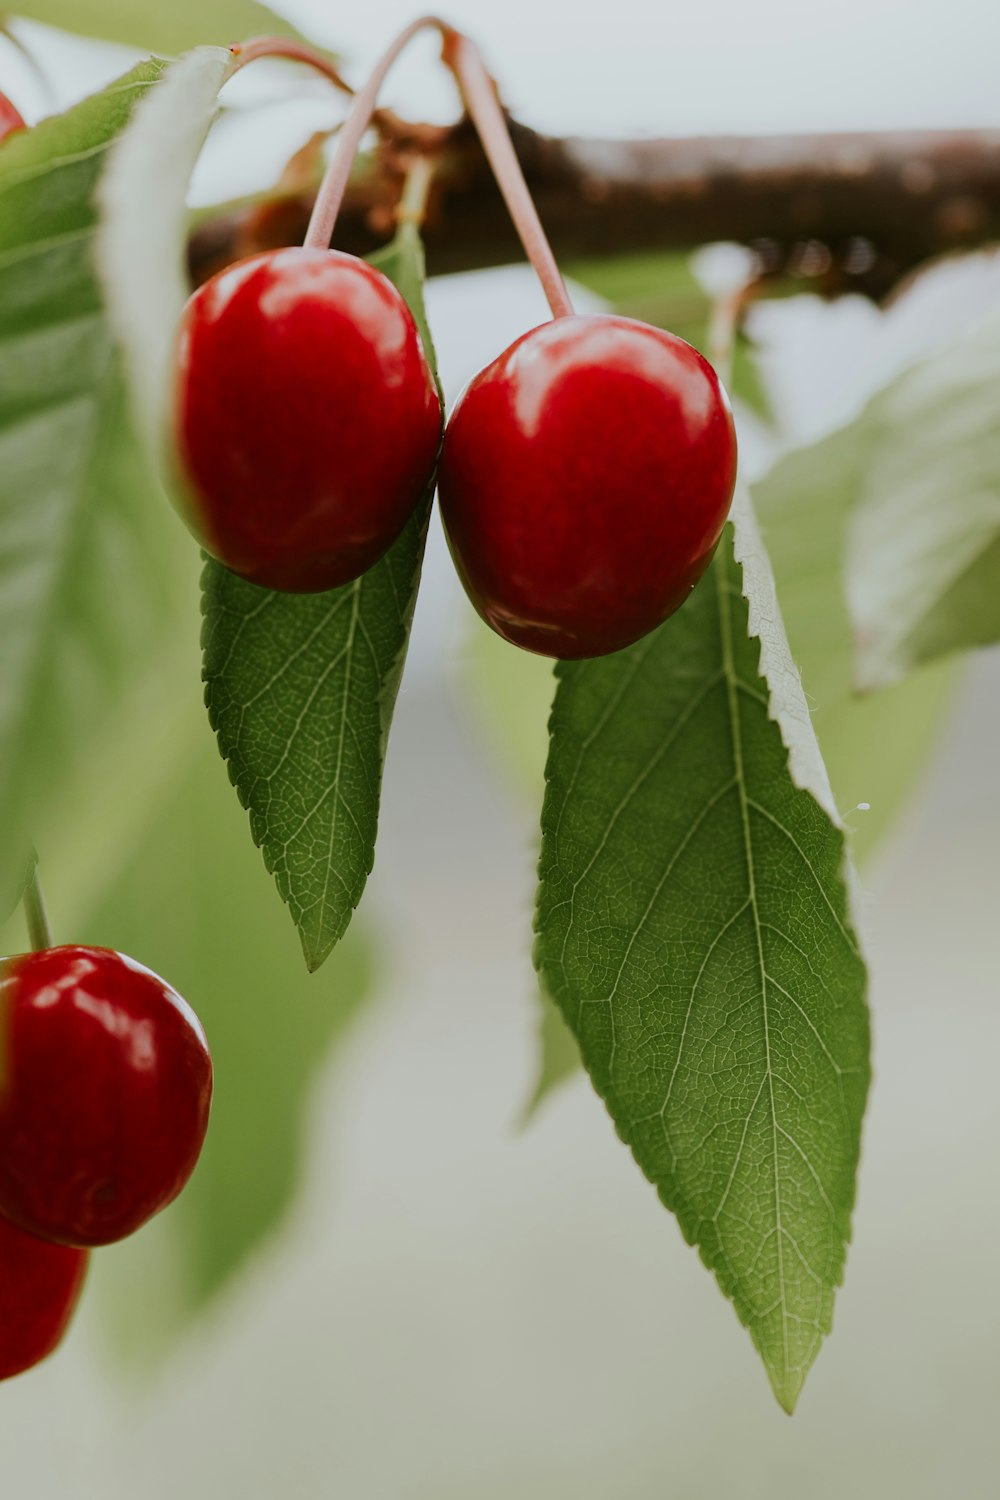 two cherries hanging from a branch with leaves